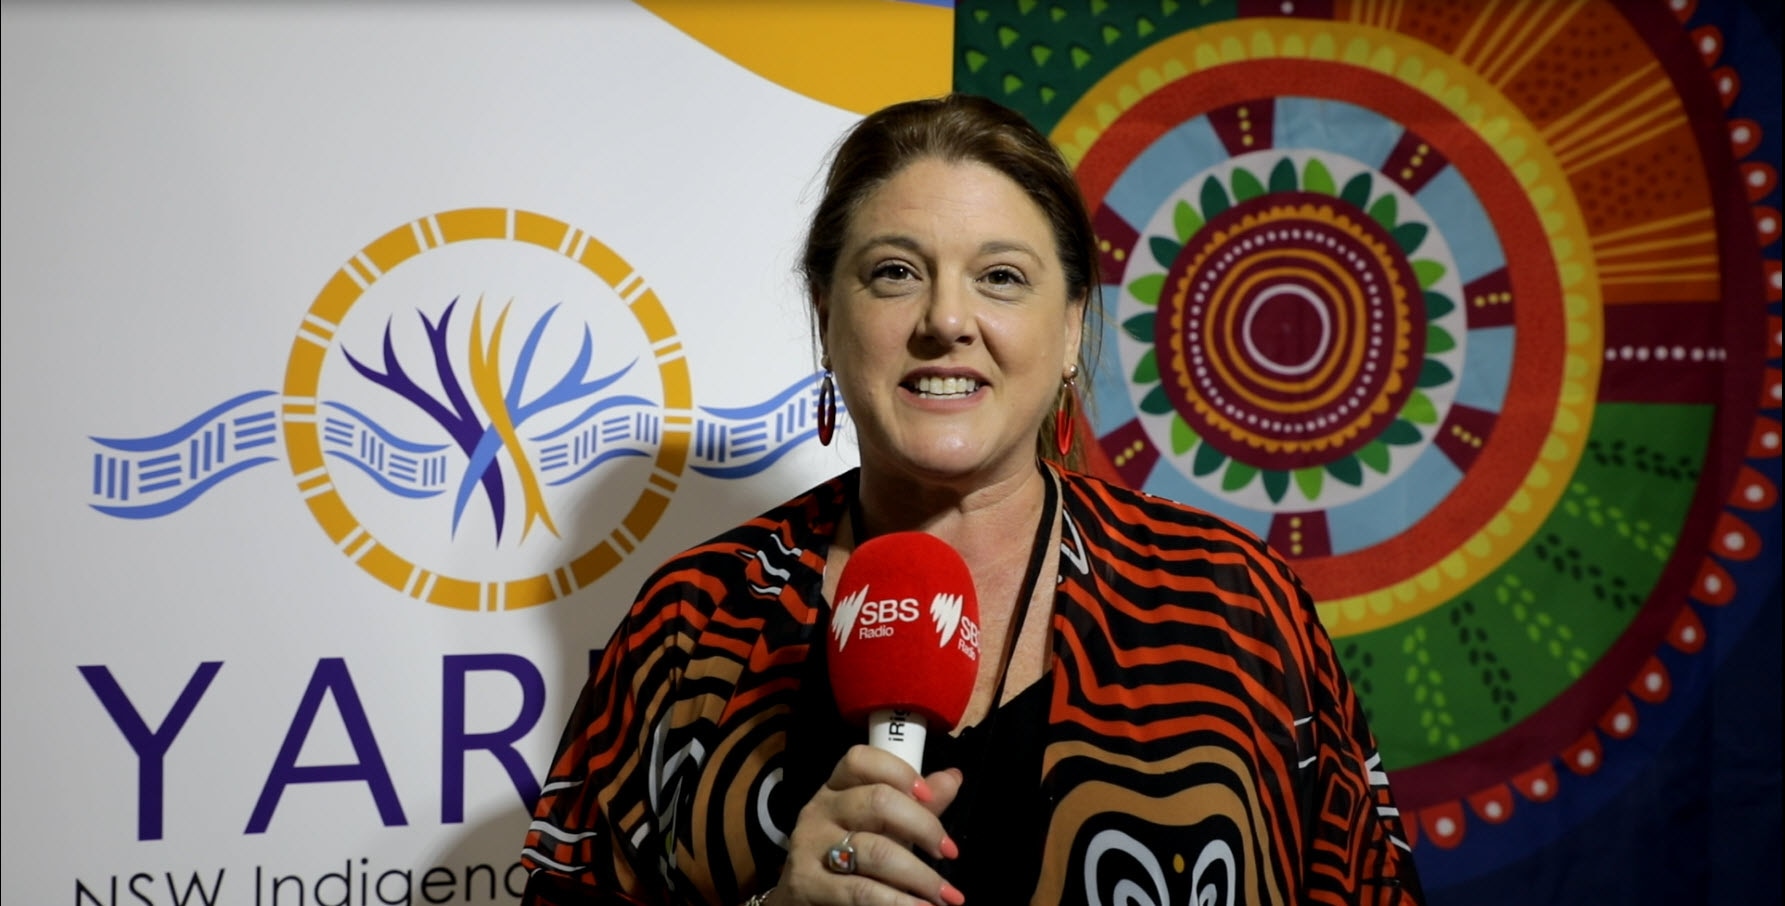 Annette Lamb, YARA NSW Indigenous Business and Employment Hub